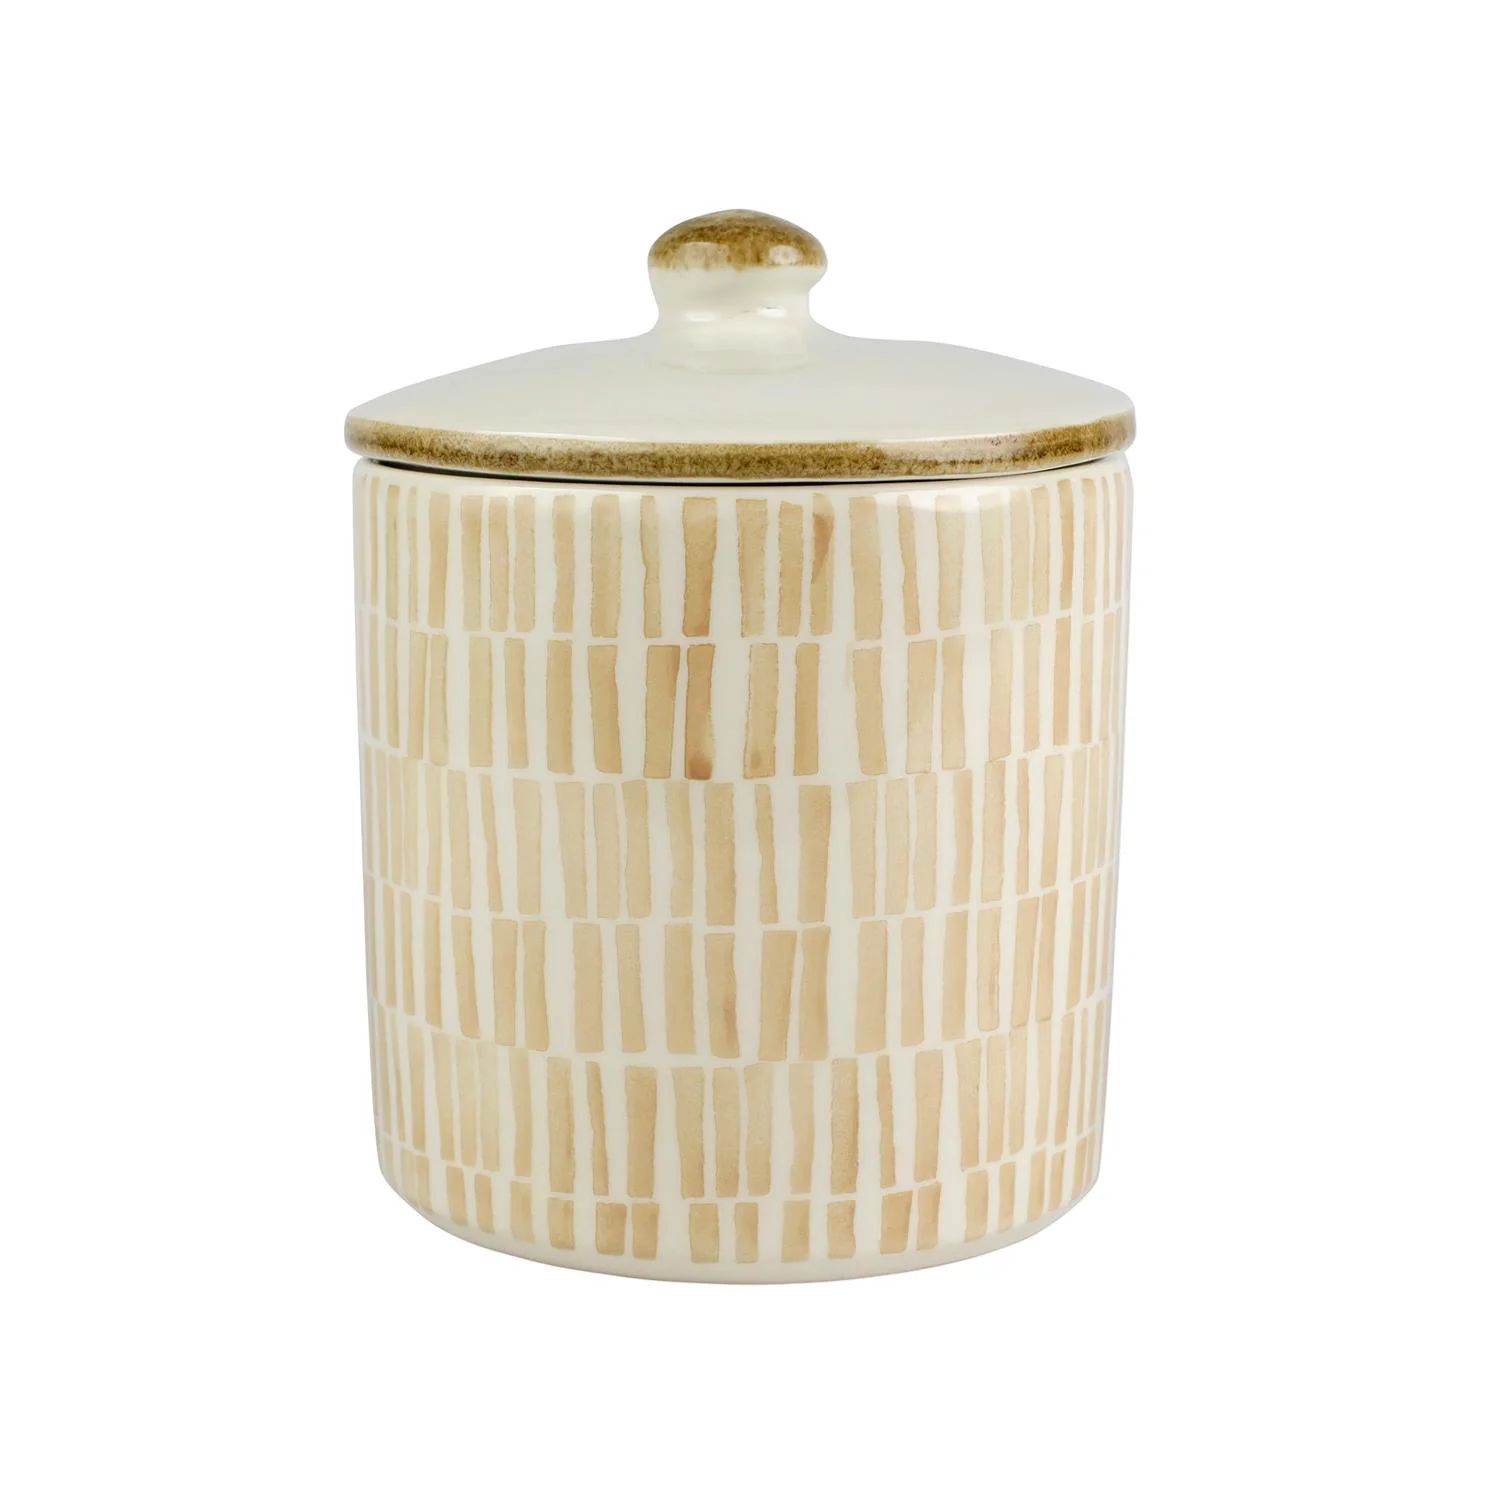 Viva by Vietri Earth Bamboo Medium Canister in Beige/Cream White 6.25 Lord & Taylor | Lord & Taylor